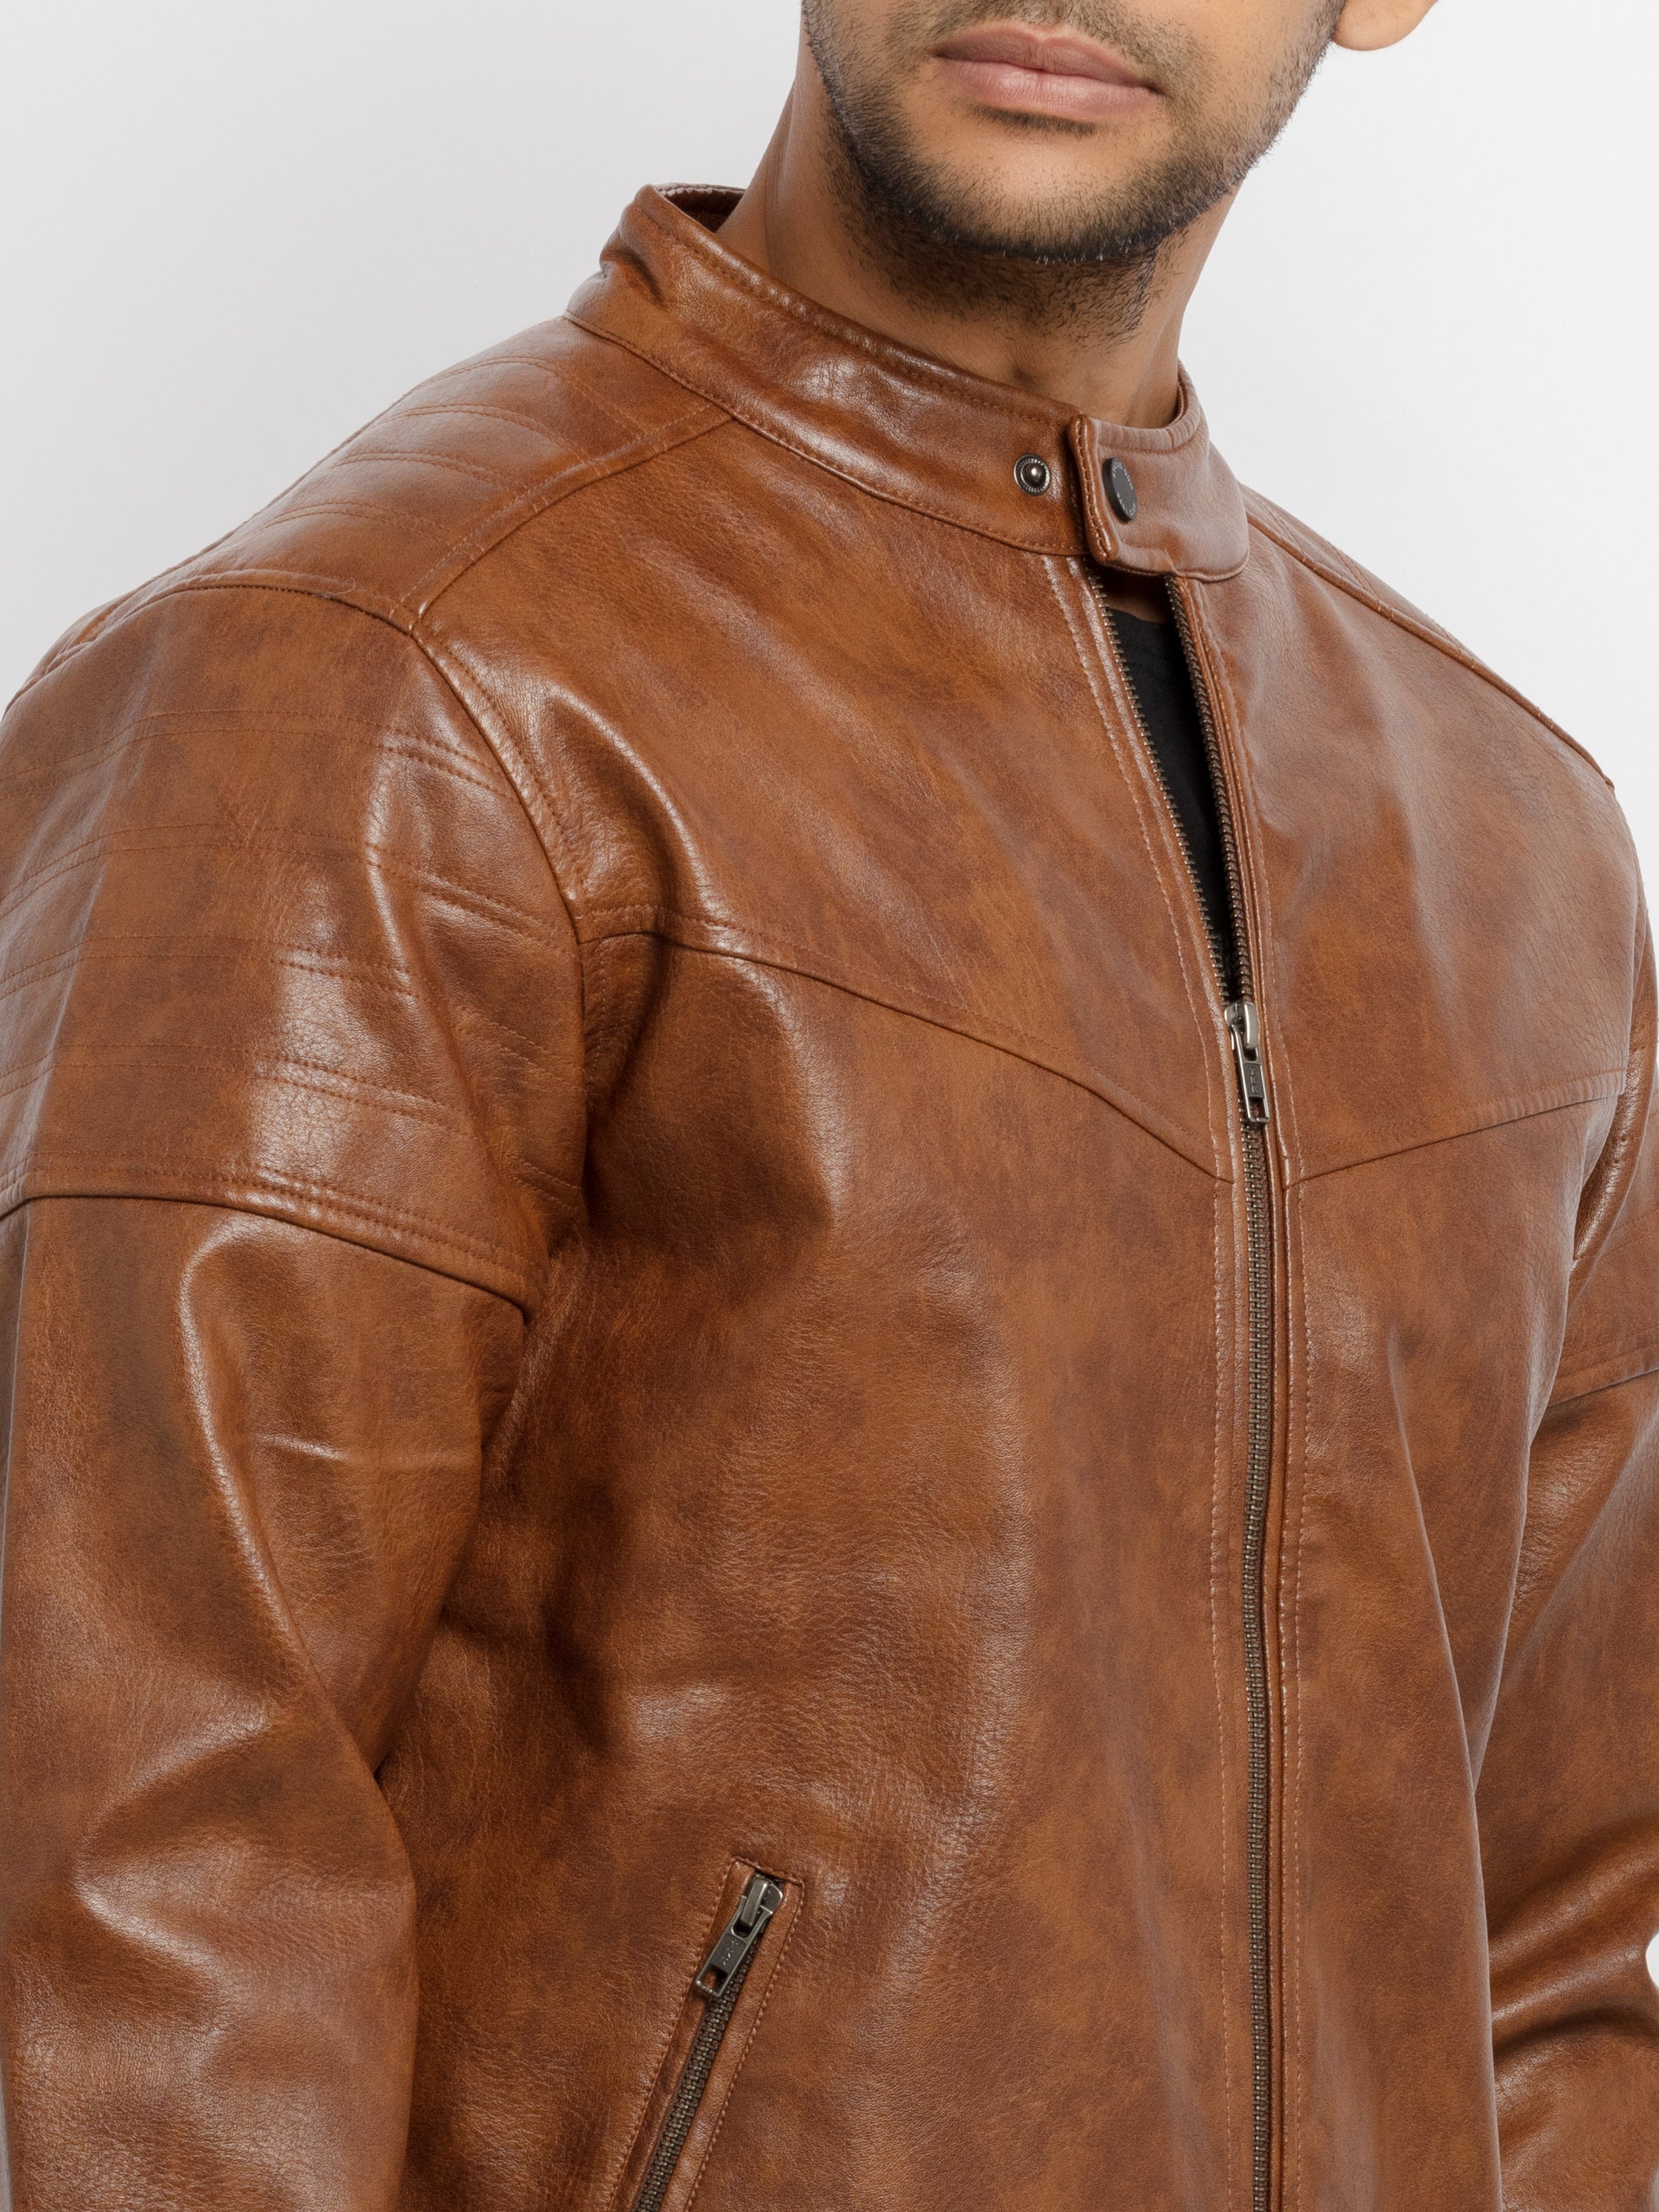 New! Indianapolis Brown Cowhide Leather Police Jacket – Taylor's  Leatherwear, Inc.